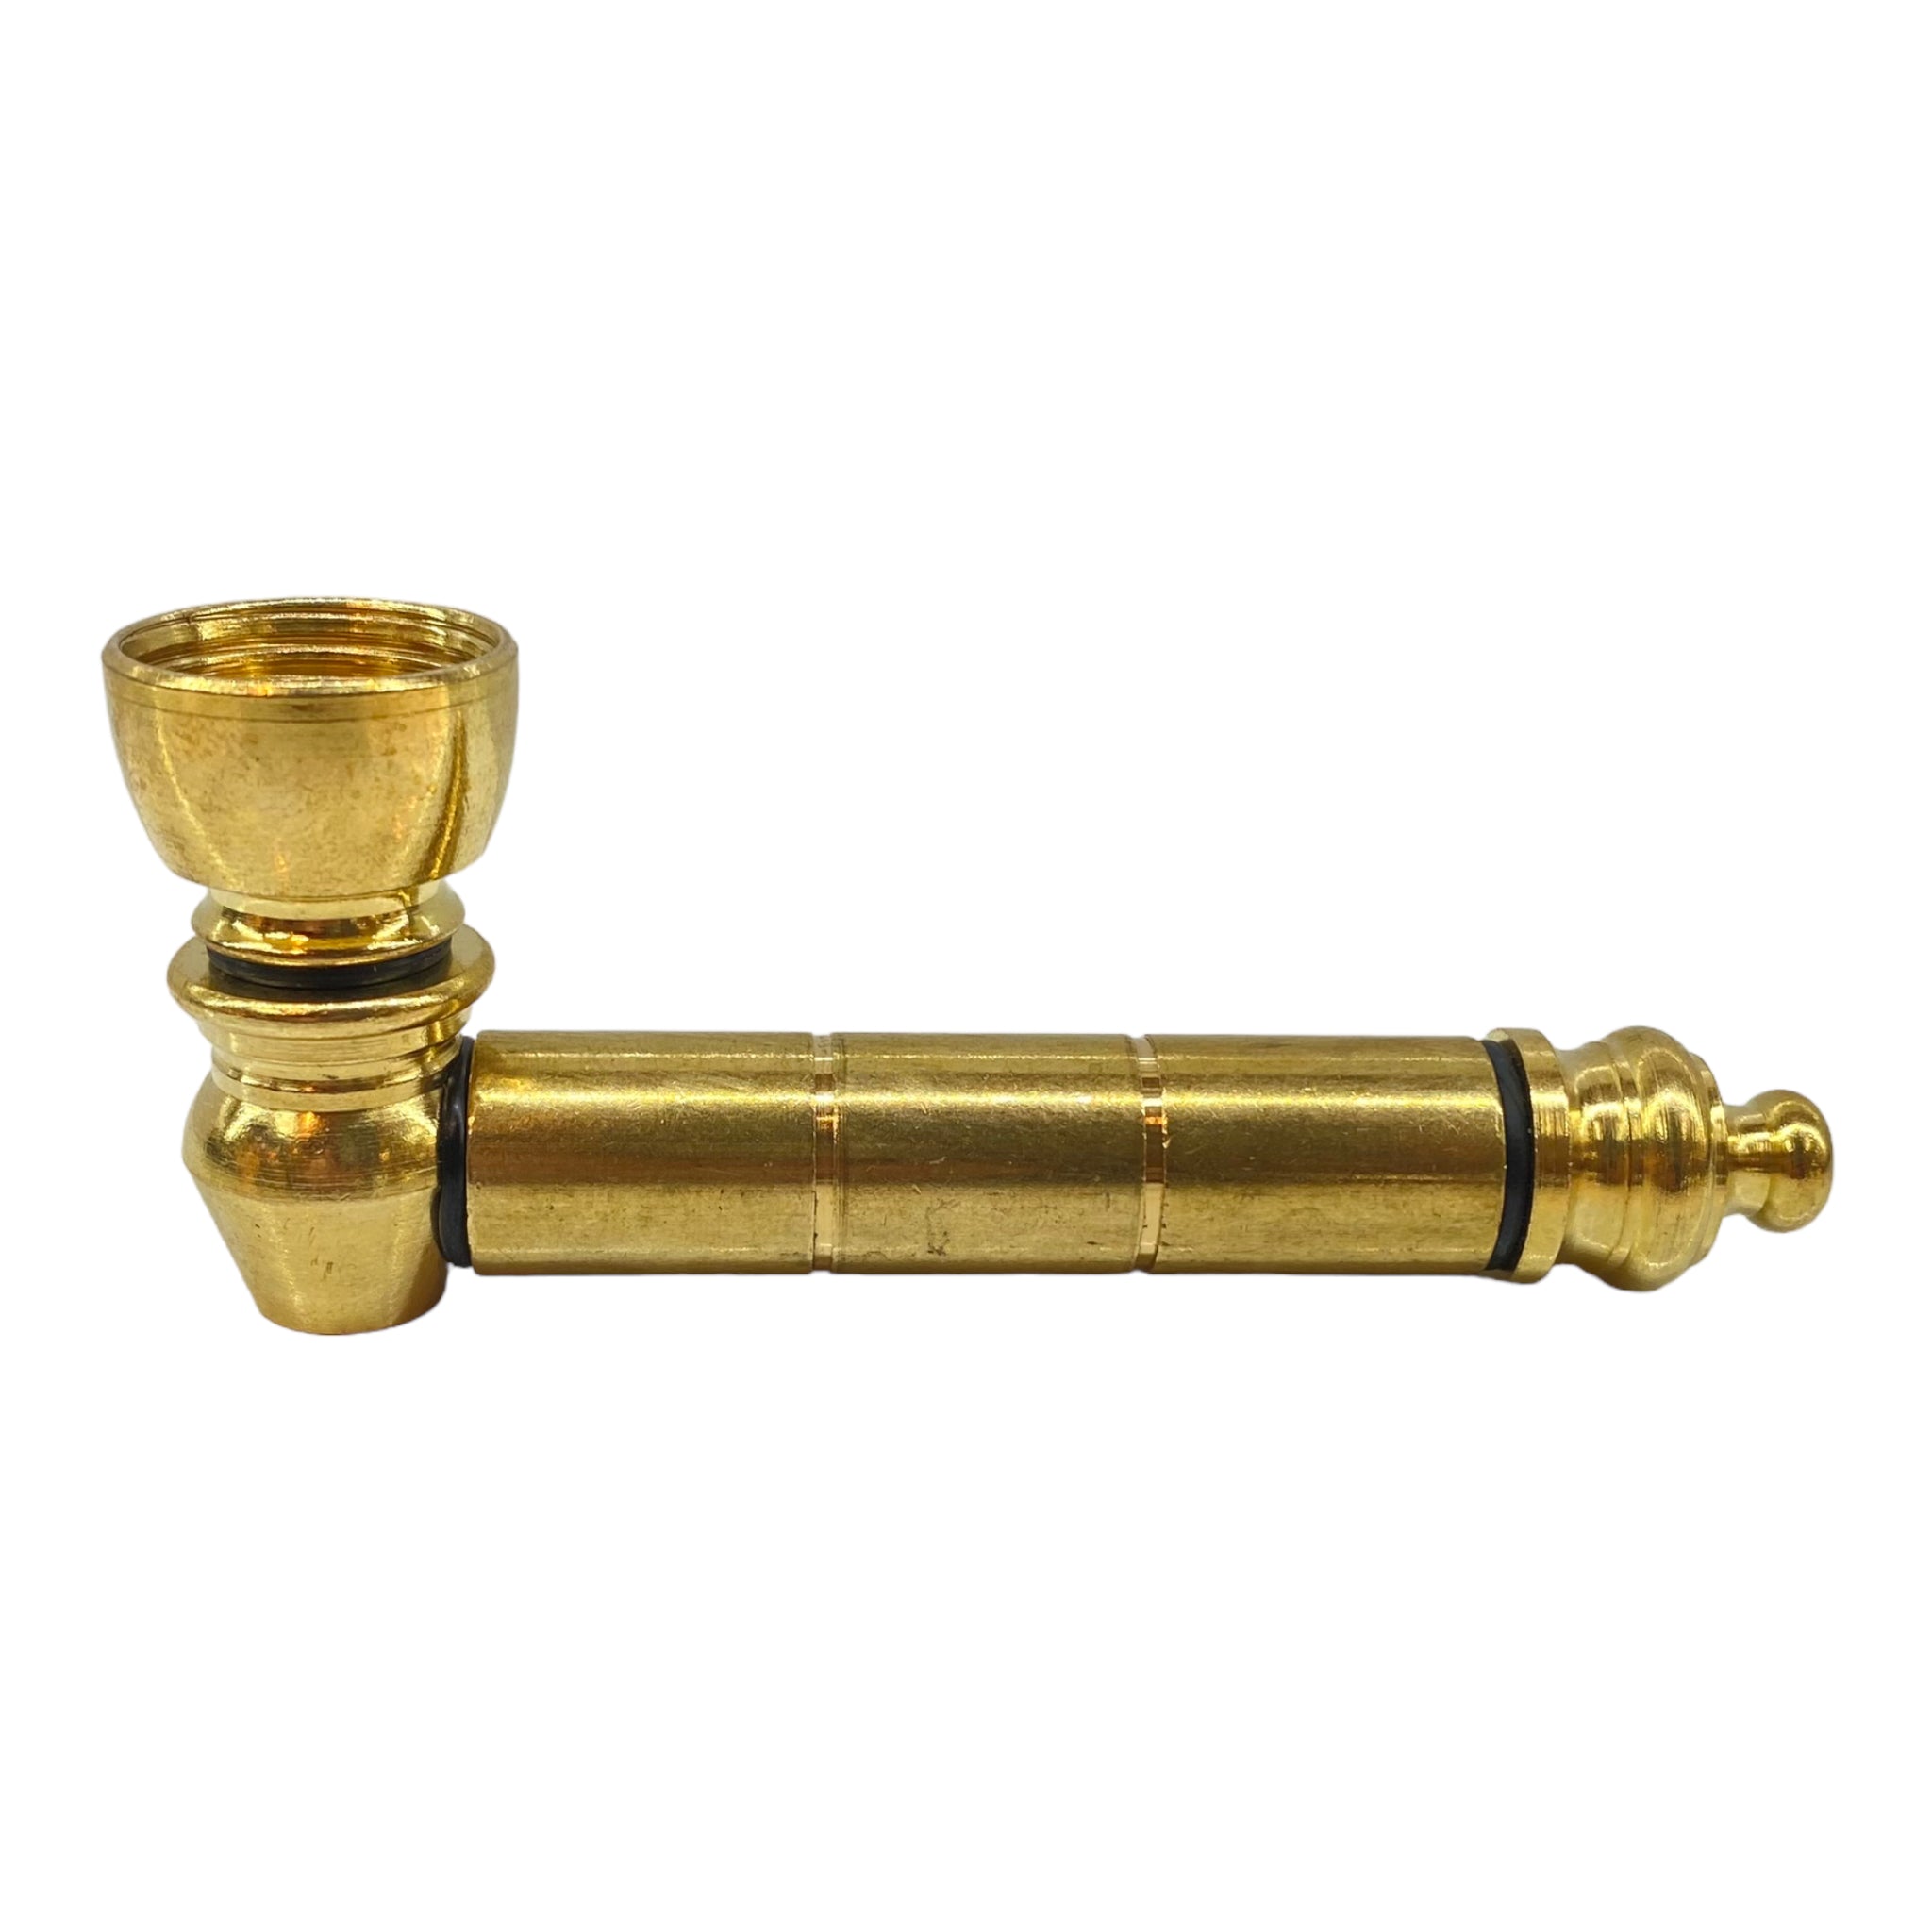 Metal Hand Pipes - Gold Basic Brass Metal Pipe With Small Chamber